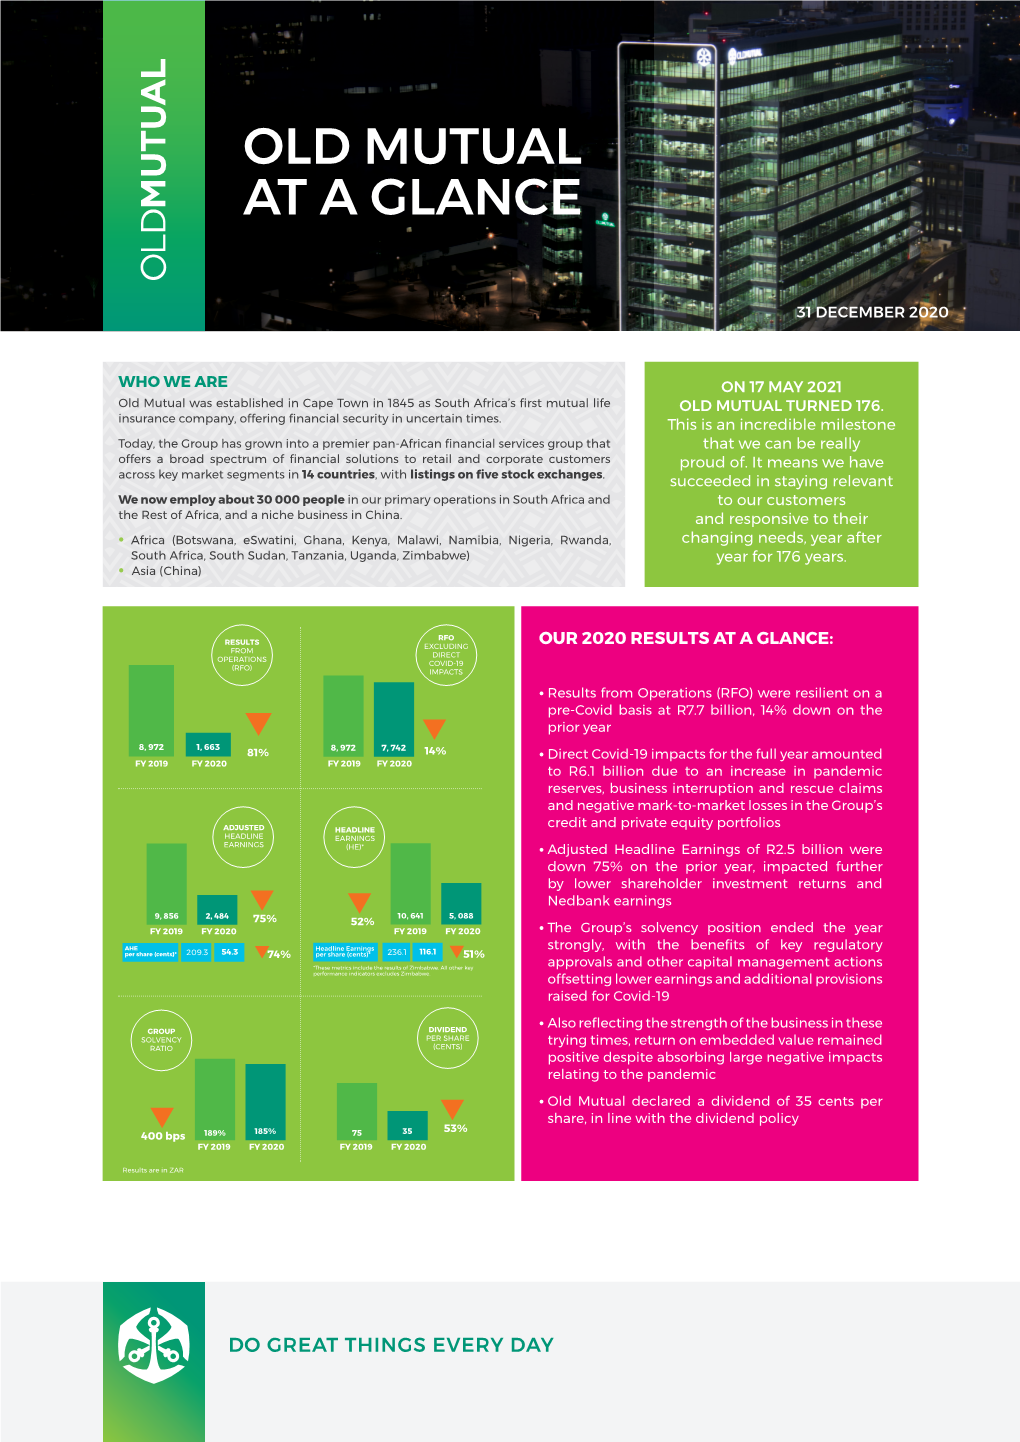 Old Mutual at a Glance